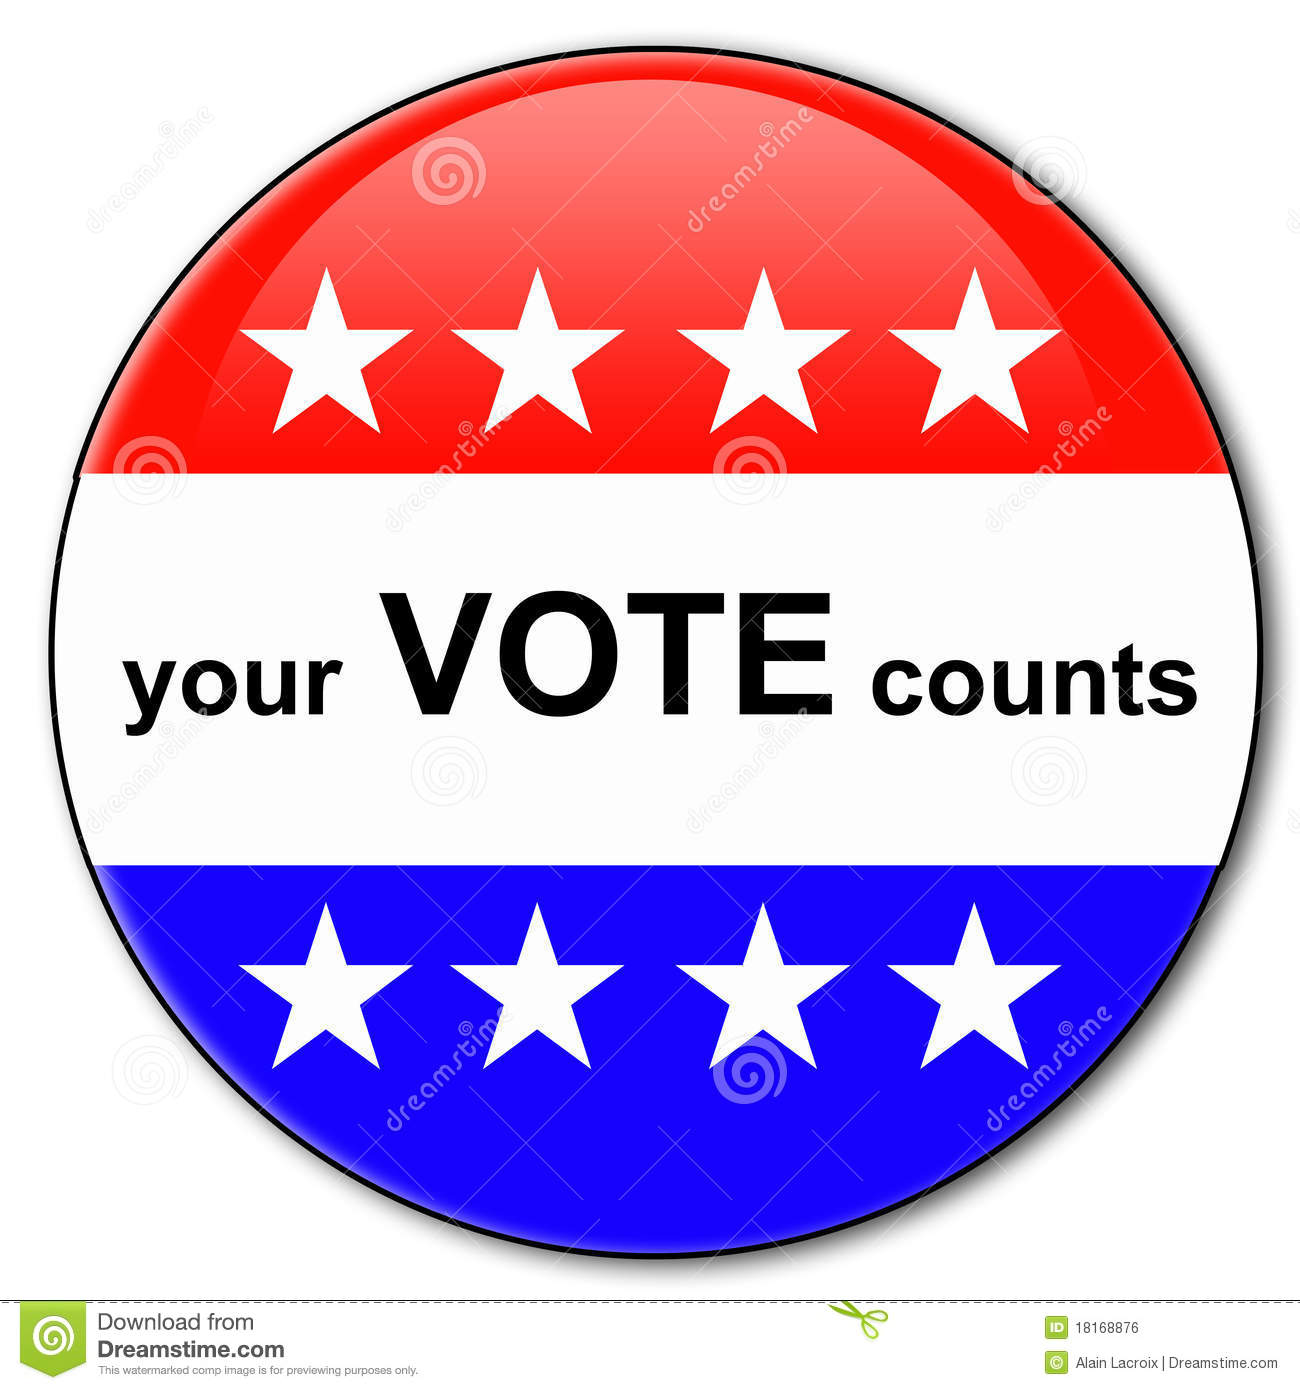 Your Vote Counts Royalty Free Stock Image   Image  18168876